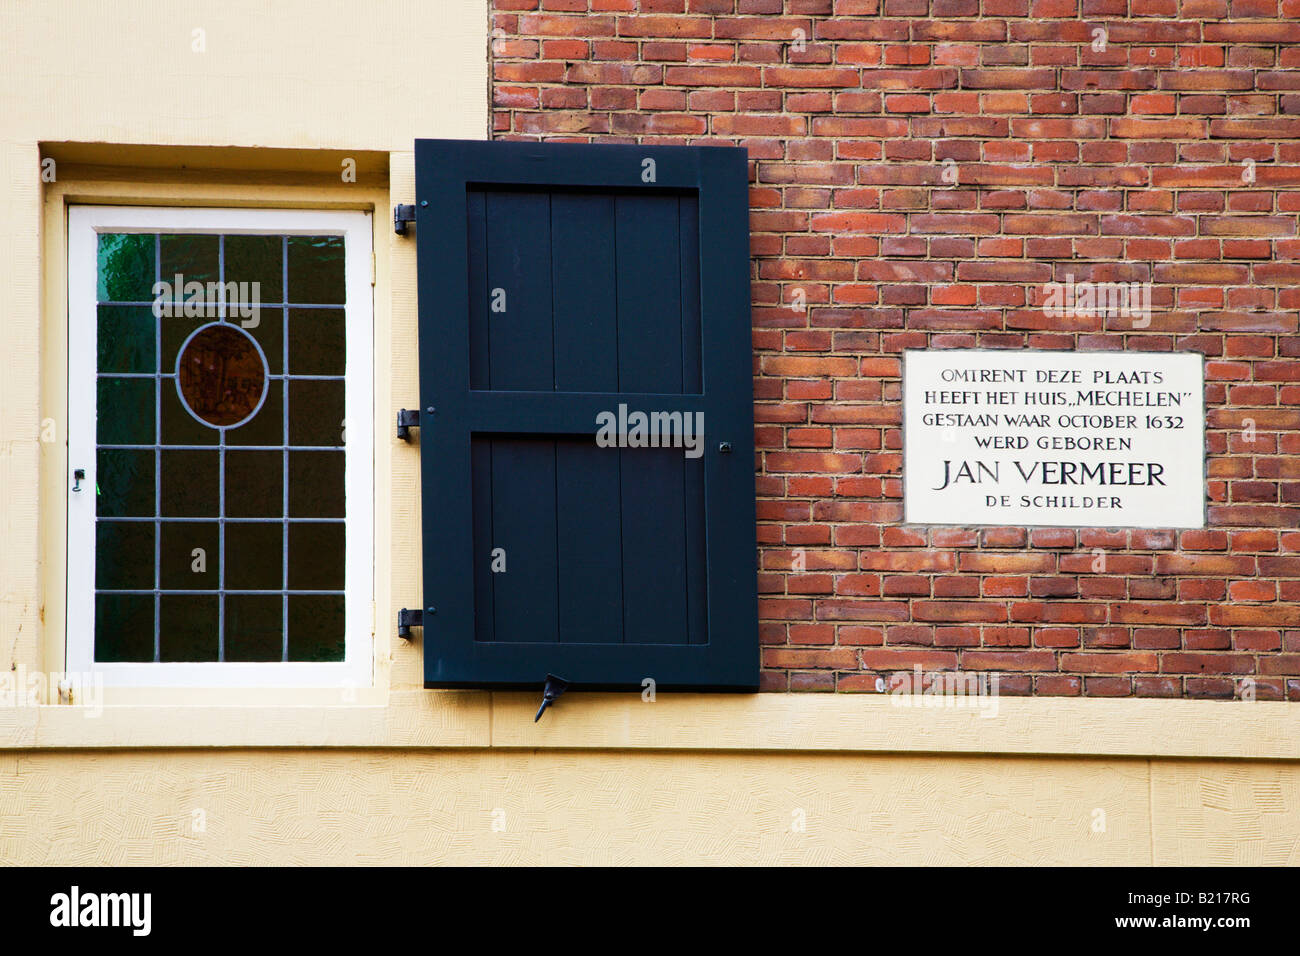 Location of the birthplace of painter Jan Vermeer Delft Netherlands Stock Photo